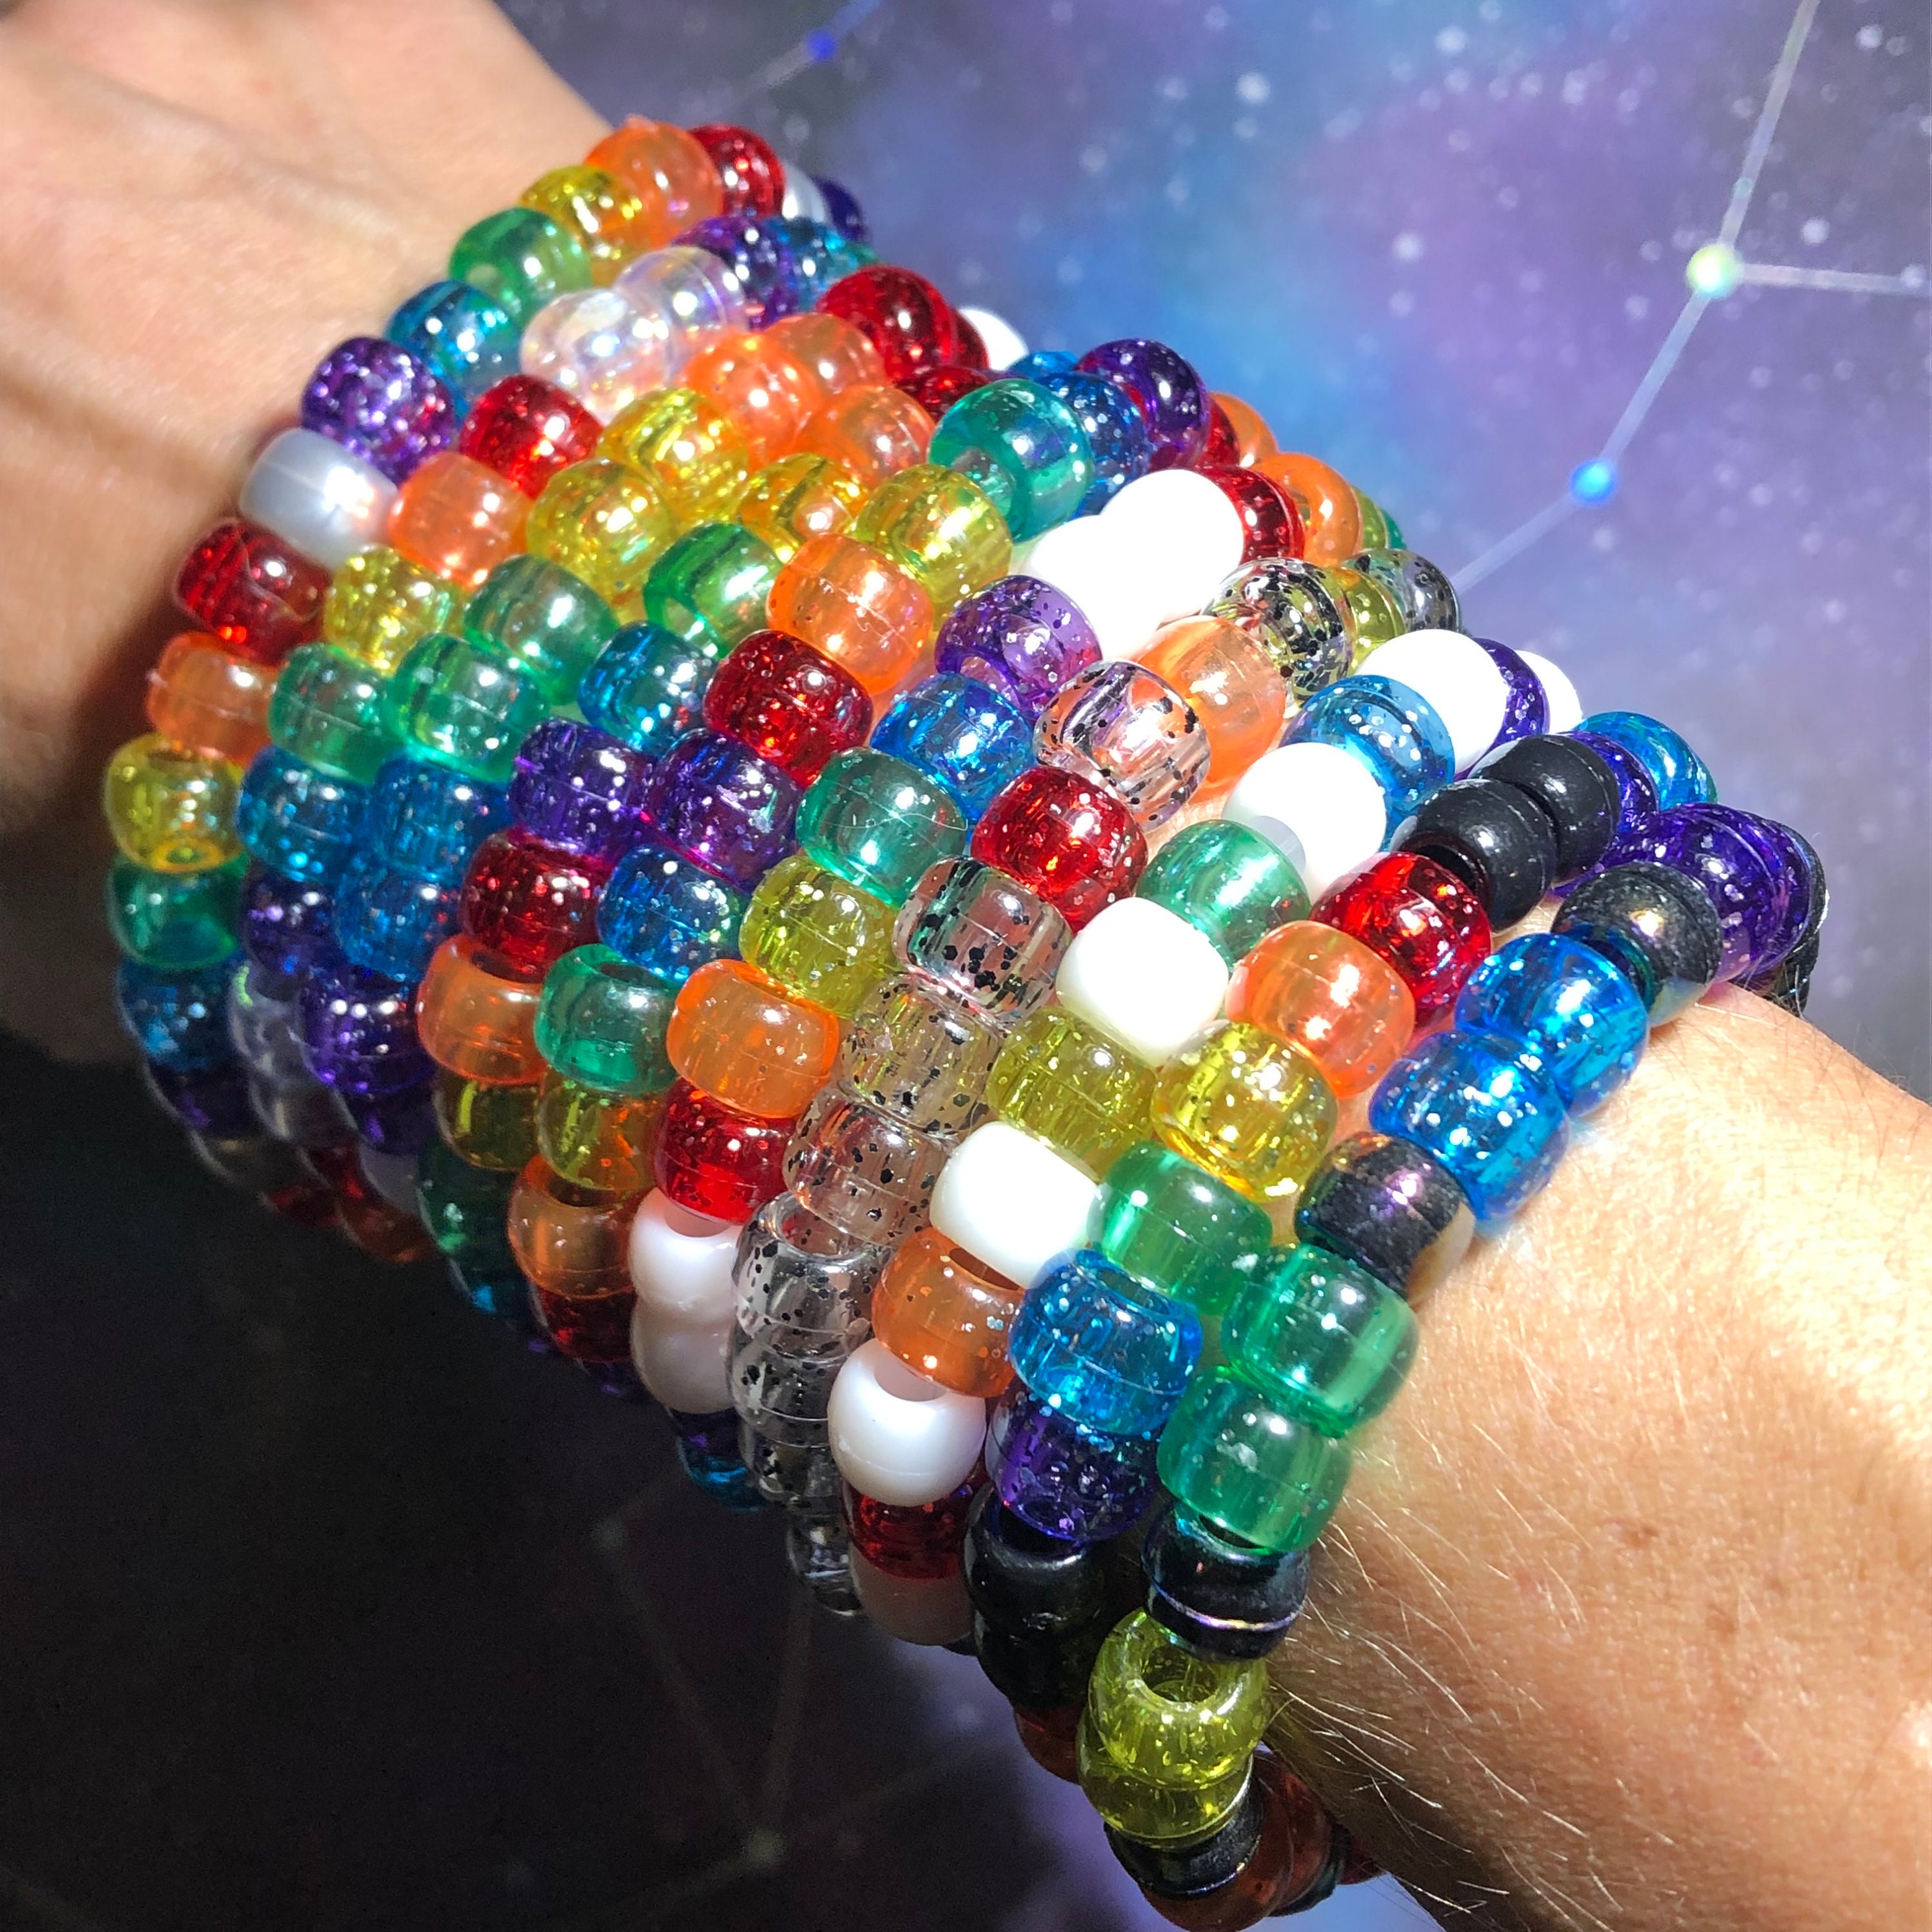 Handmade Kandi Bead Bracelets for Festivals, Parties, Raves, and More! PLUR Fun